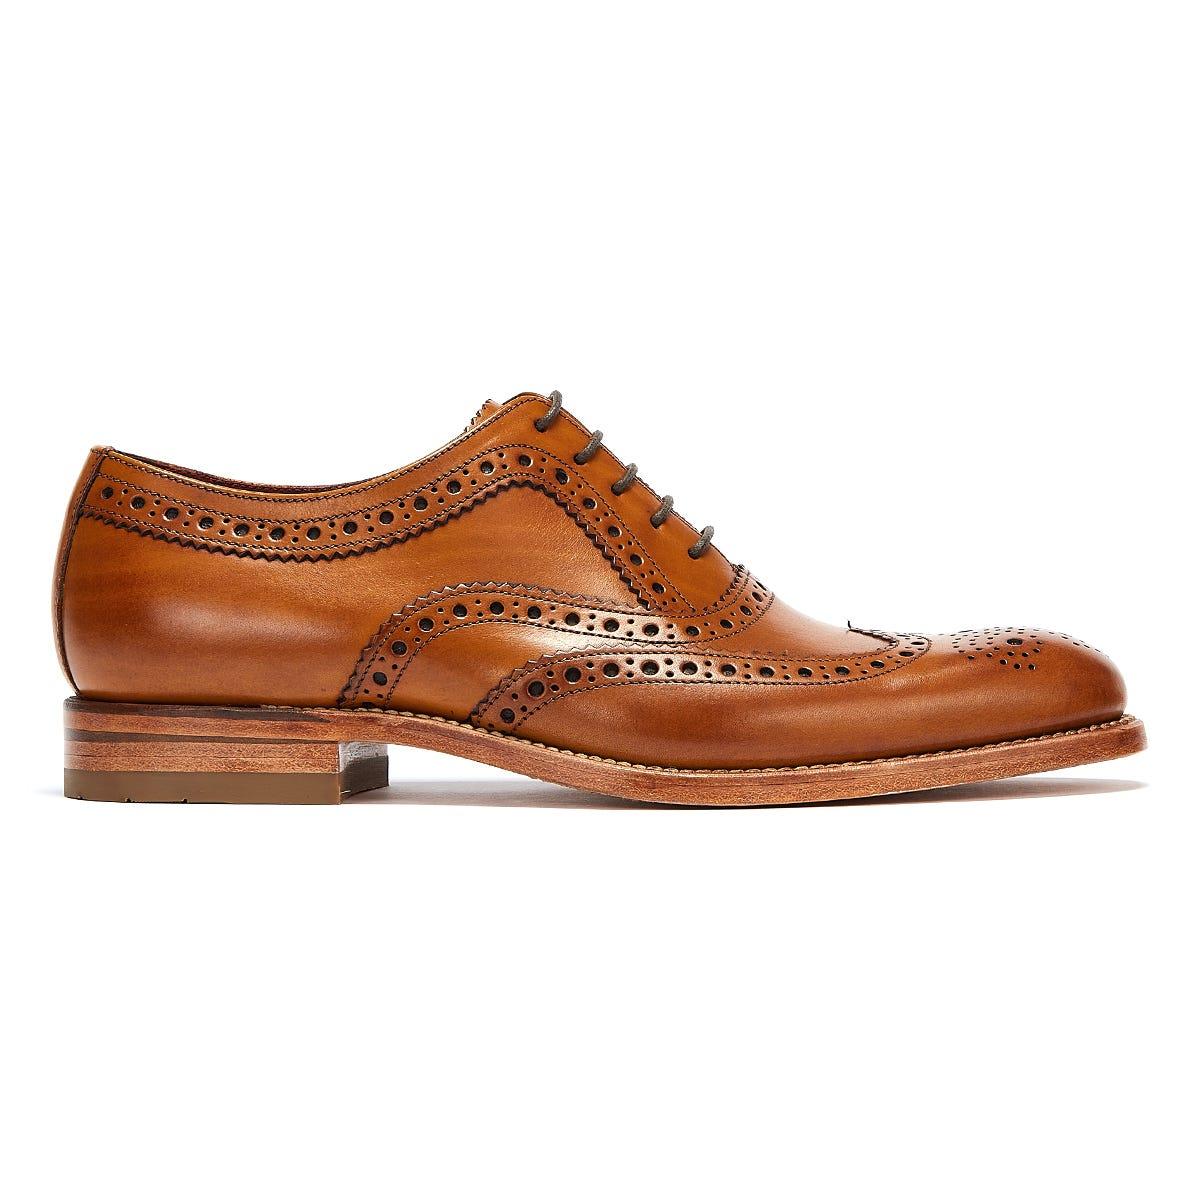 Loake Leather Loake Fearnley Brogue Oxford in Tan (Brown) for Men - Lyst